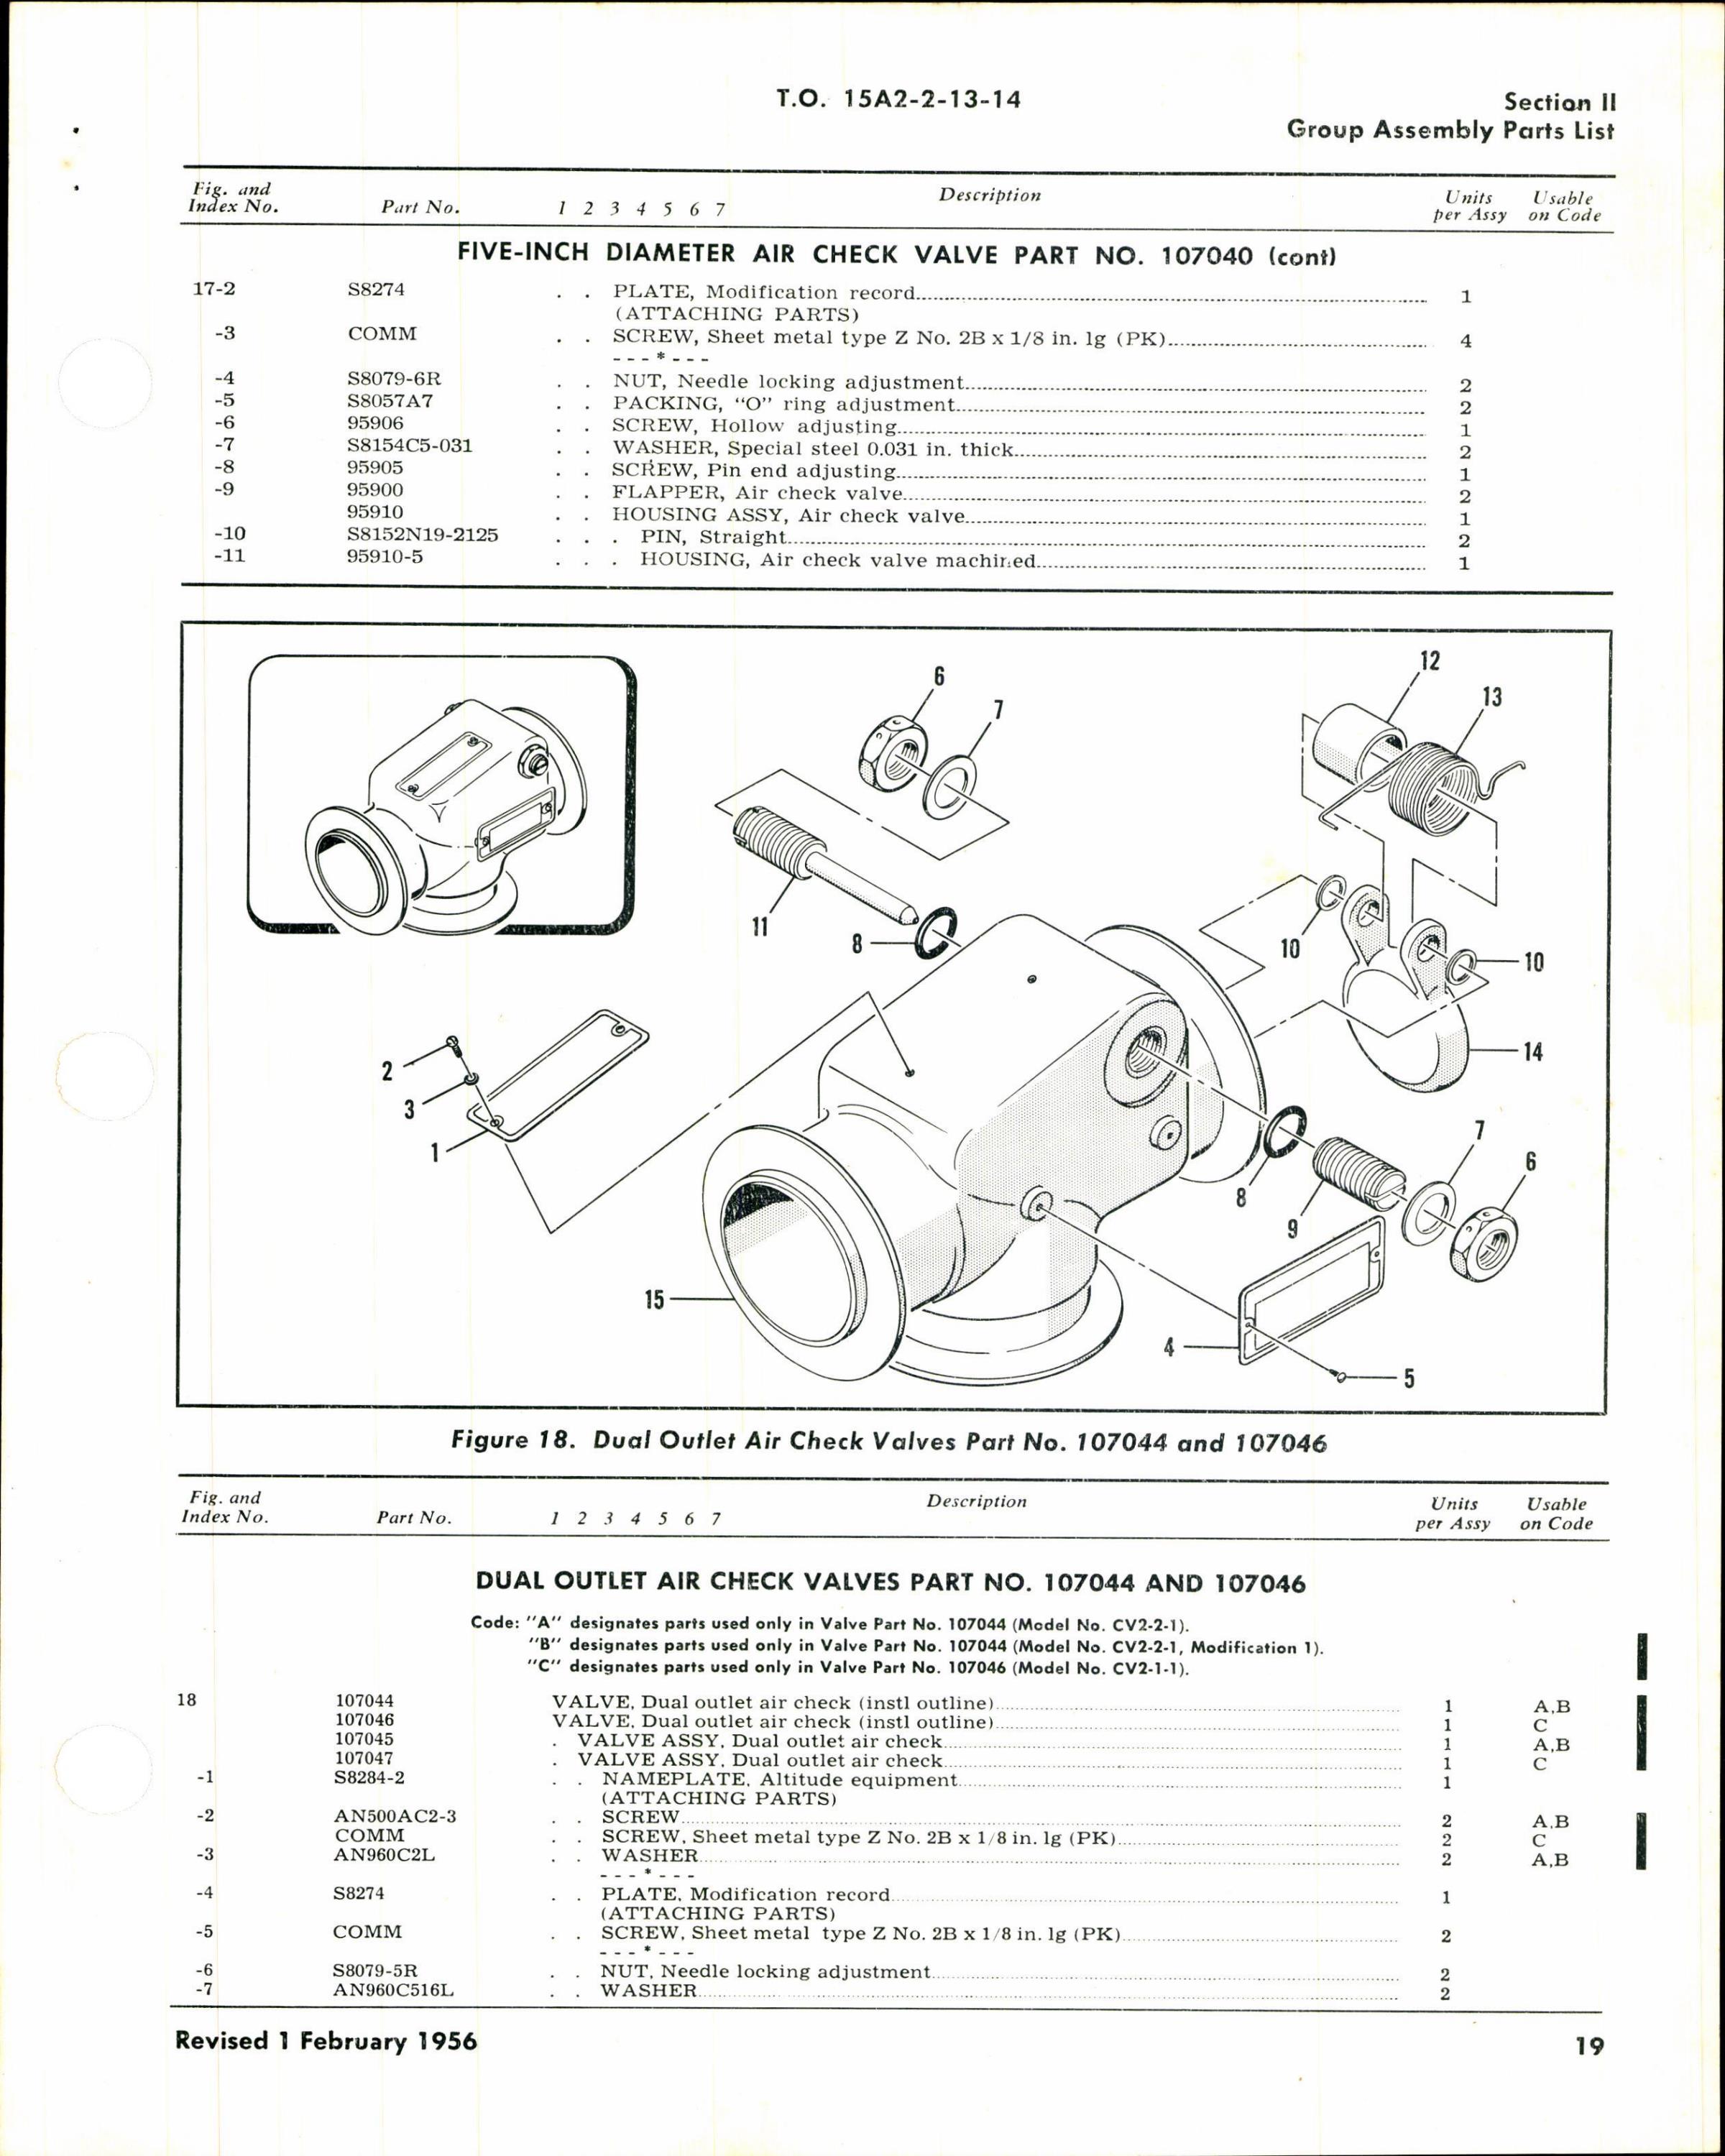 Sample page 3 from AirCorps Library document: Illustrated Parts Breakdown for Airesearch Check and Shutoff Valves